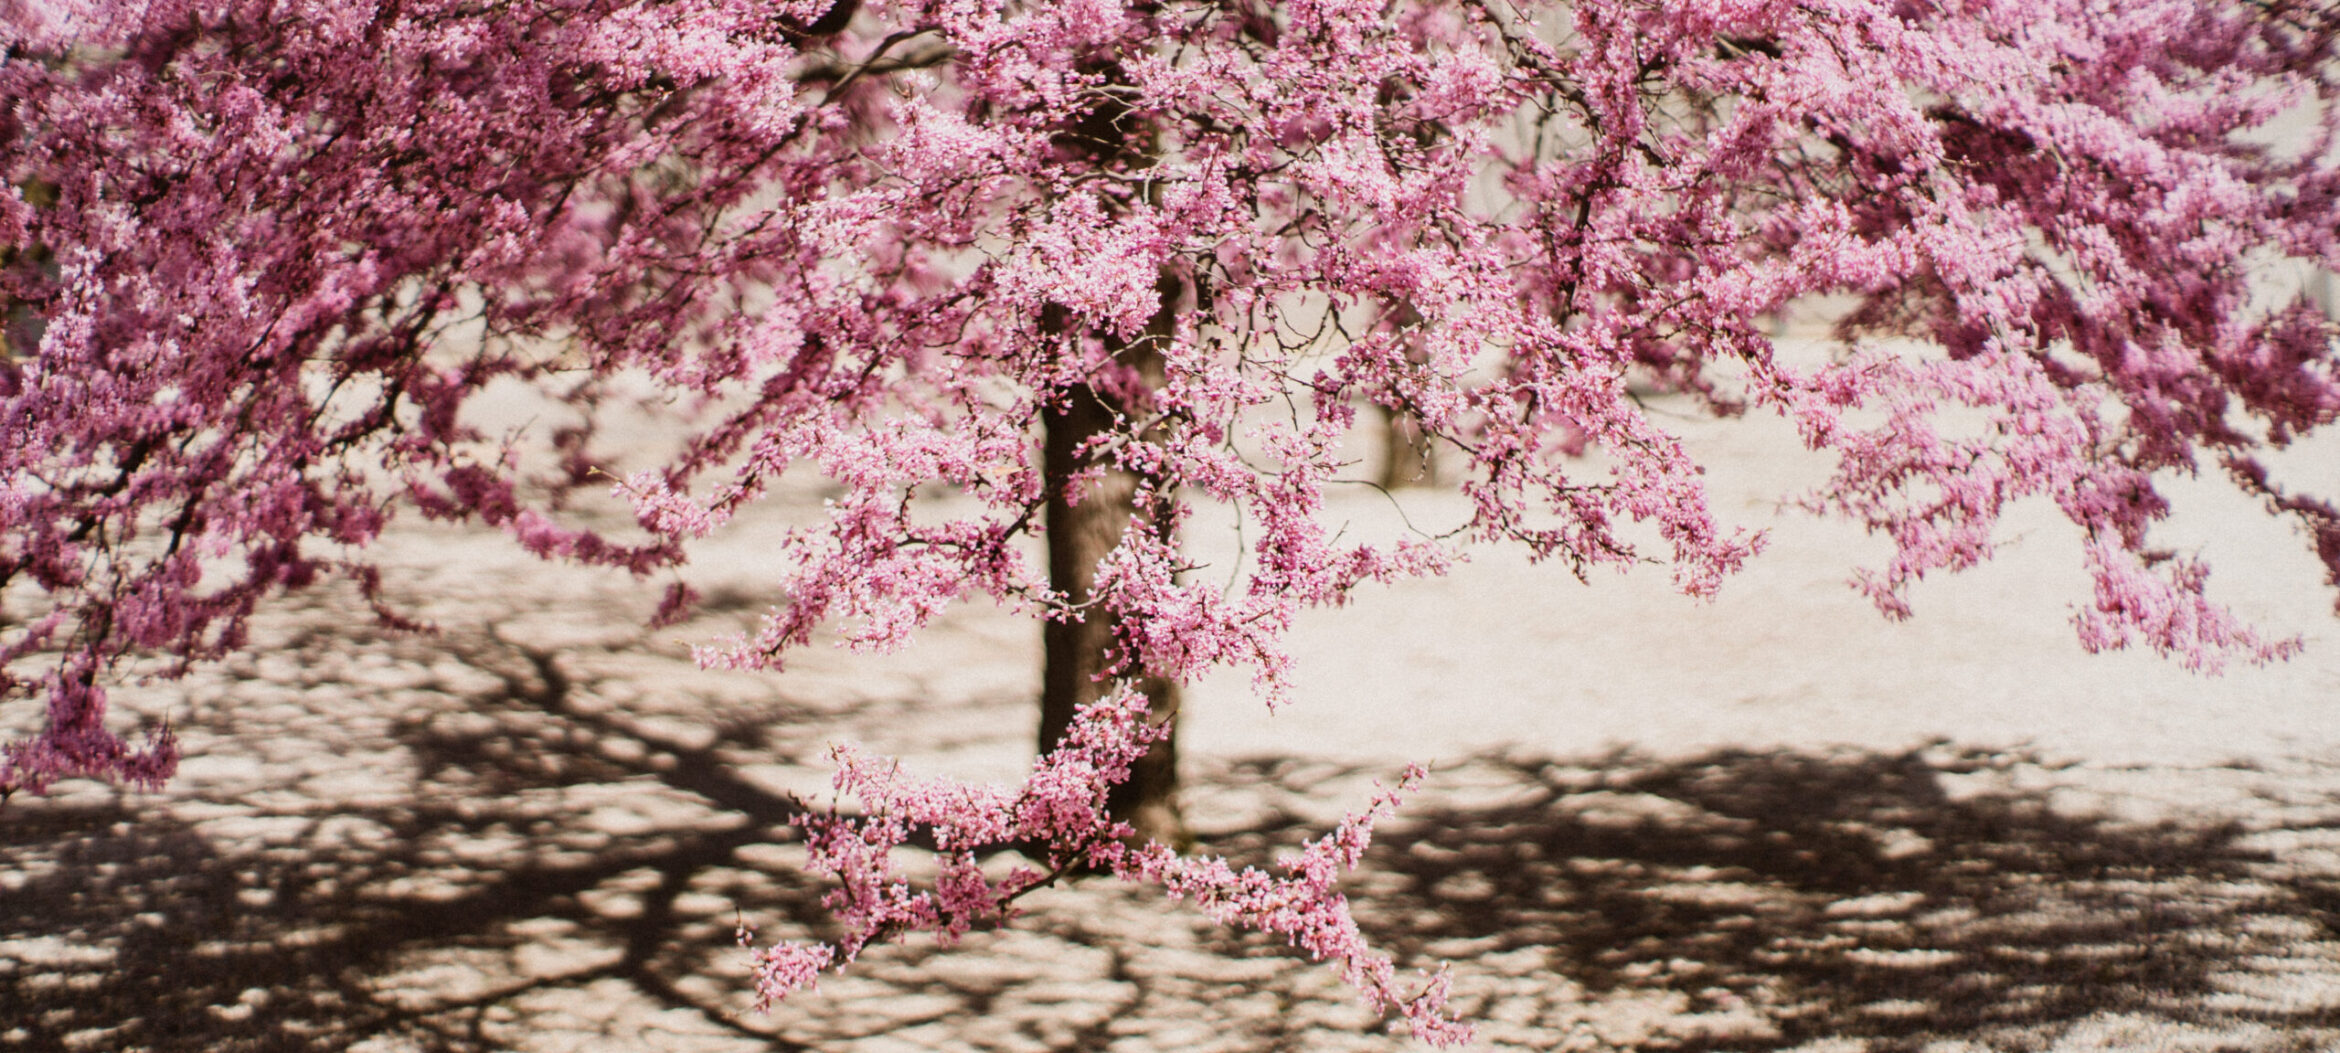 Pink flowers of a red bud tree, shadows on the gravel ground